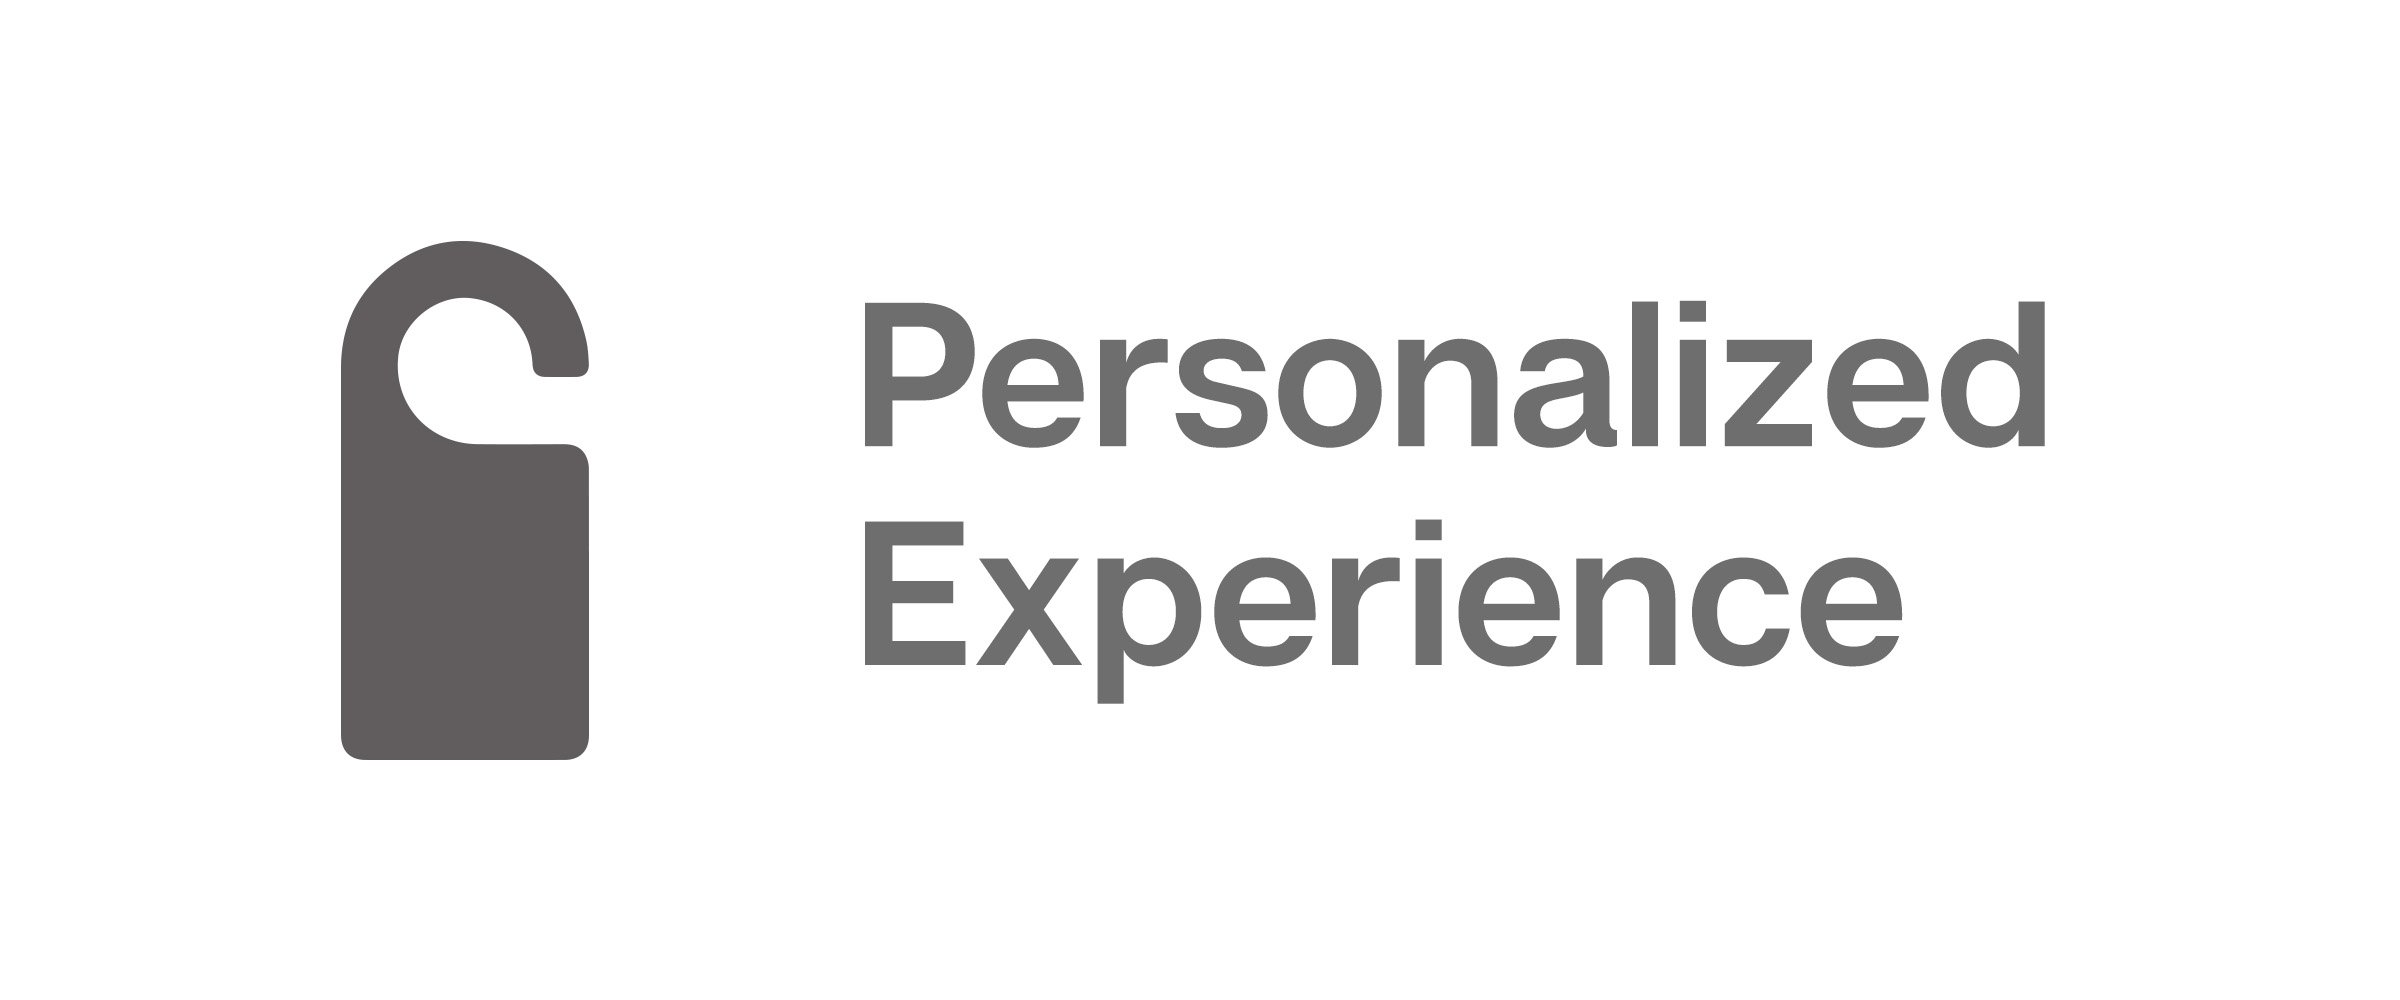 Personalized Experience